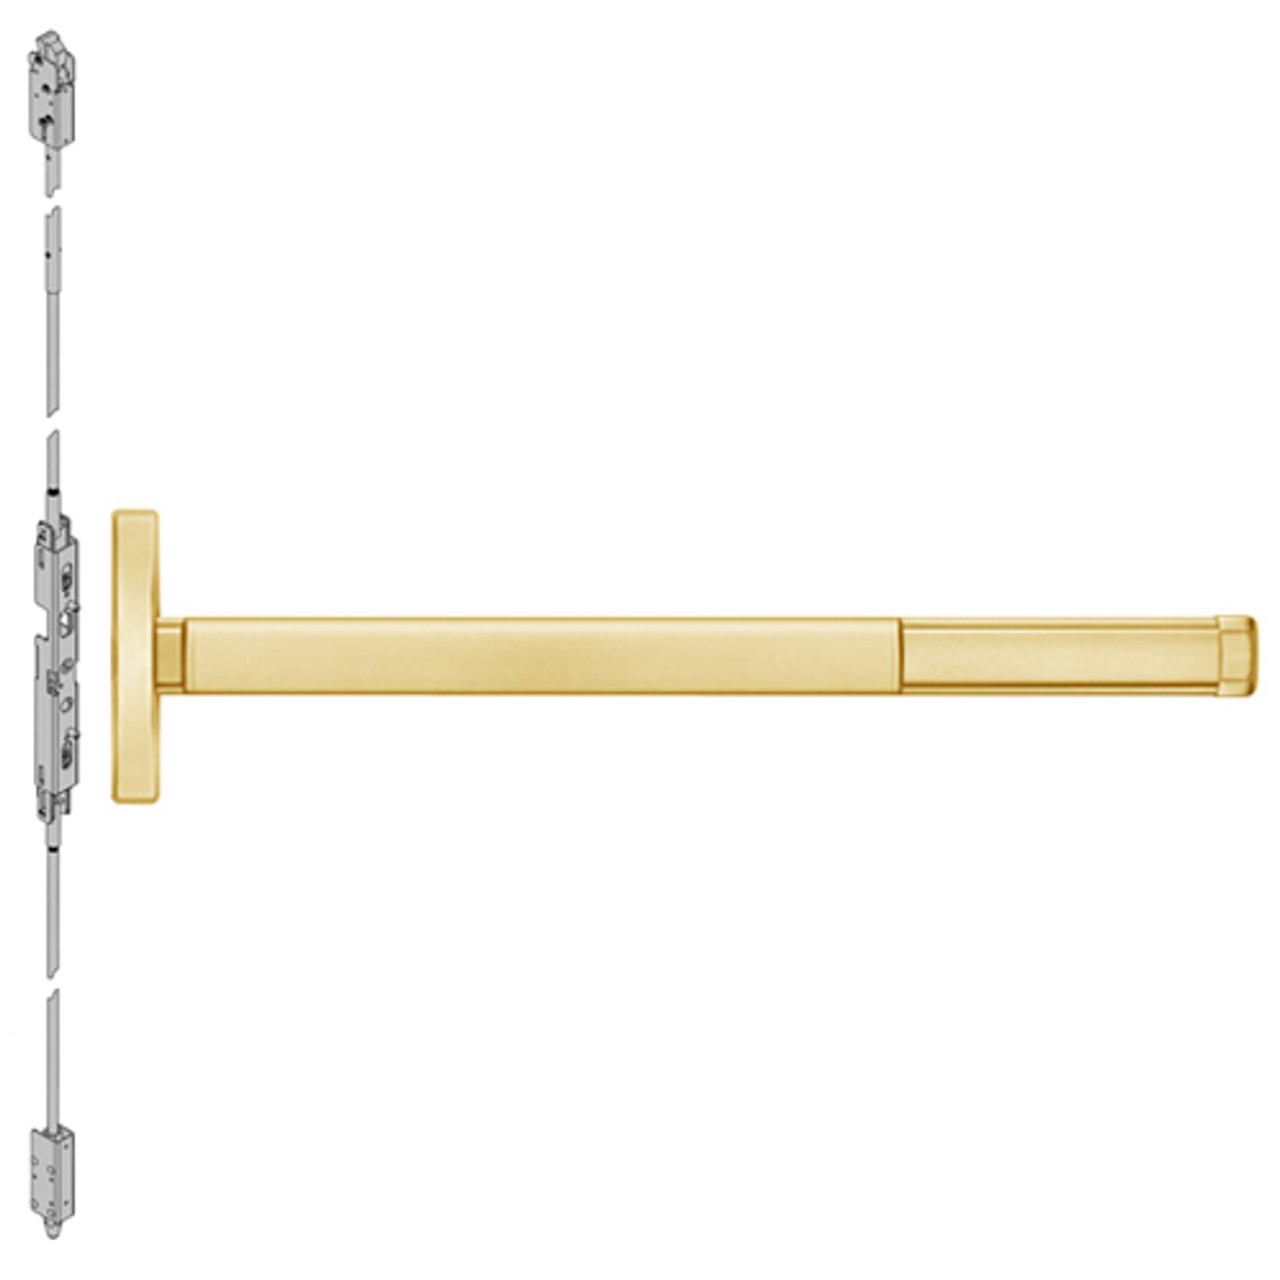 DE2614LBR-605-48 PHI 2600 Series Concealed Vertical Rod Exit Device with Delayed Egress Prepped for Lever Always Active in Bright Brass Finish